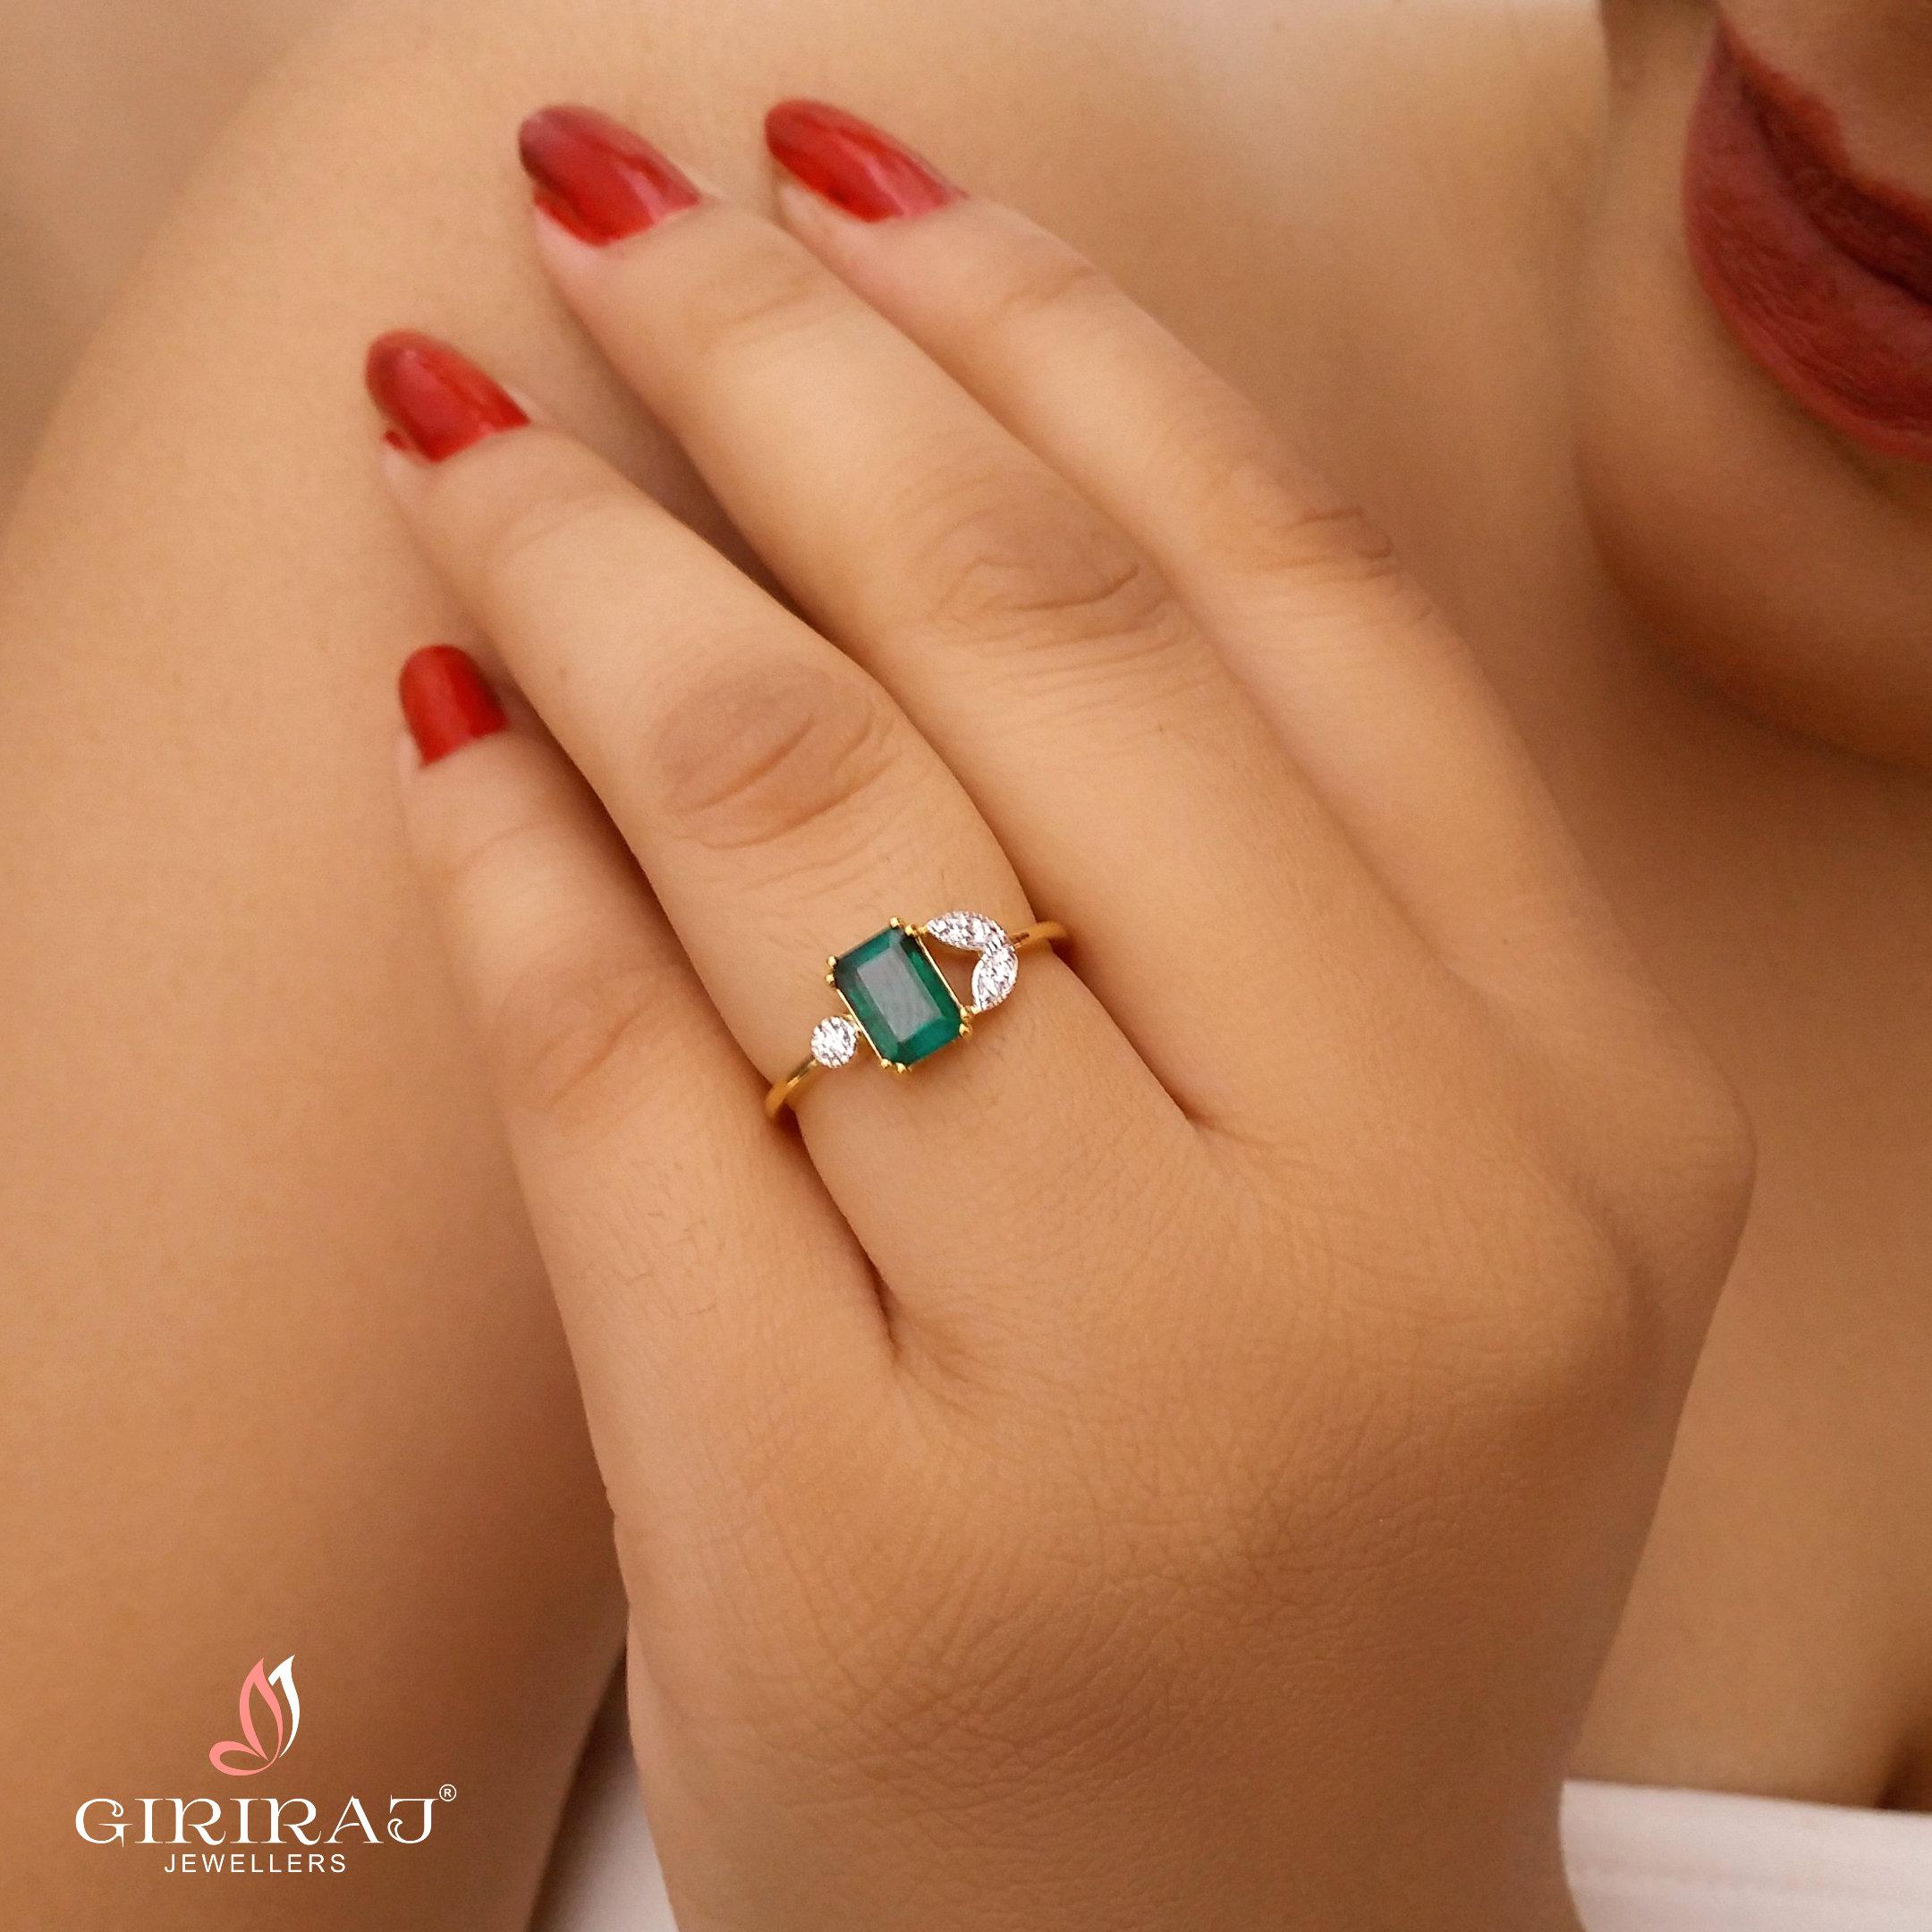 Gemstone Women's ONE WHITE GOLD RING 2.52 CARAT EMERALD DIAMOND RING at Rs  215000 in Palanpur